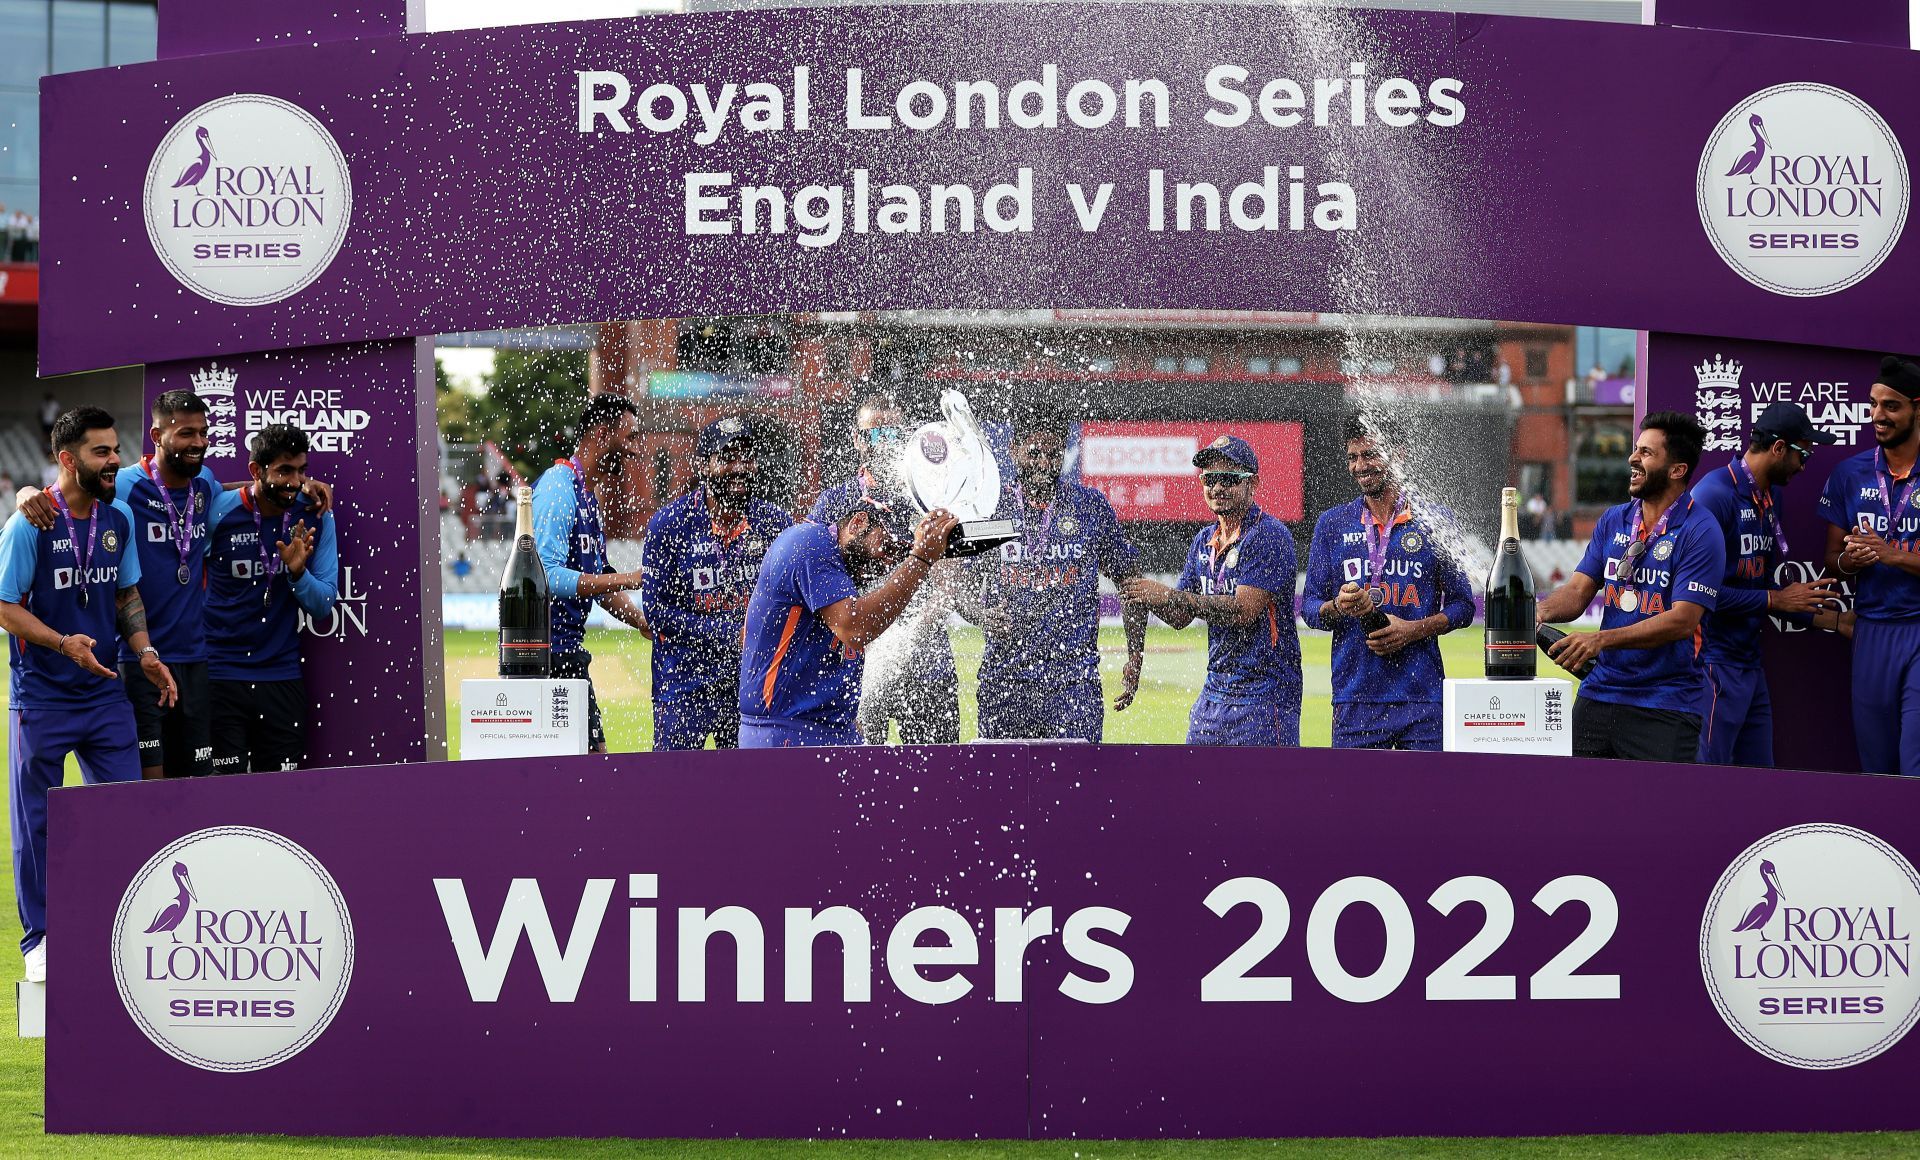 India registered a convicing 2-1 win over England in the three-match ODI series. 